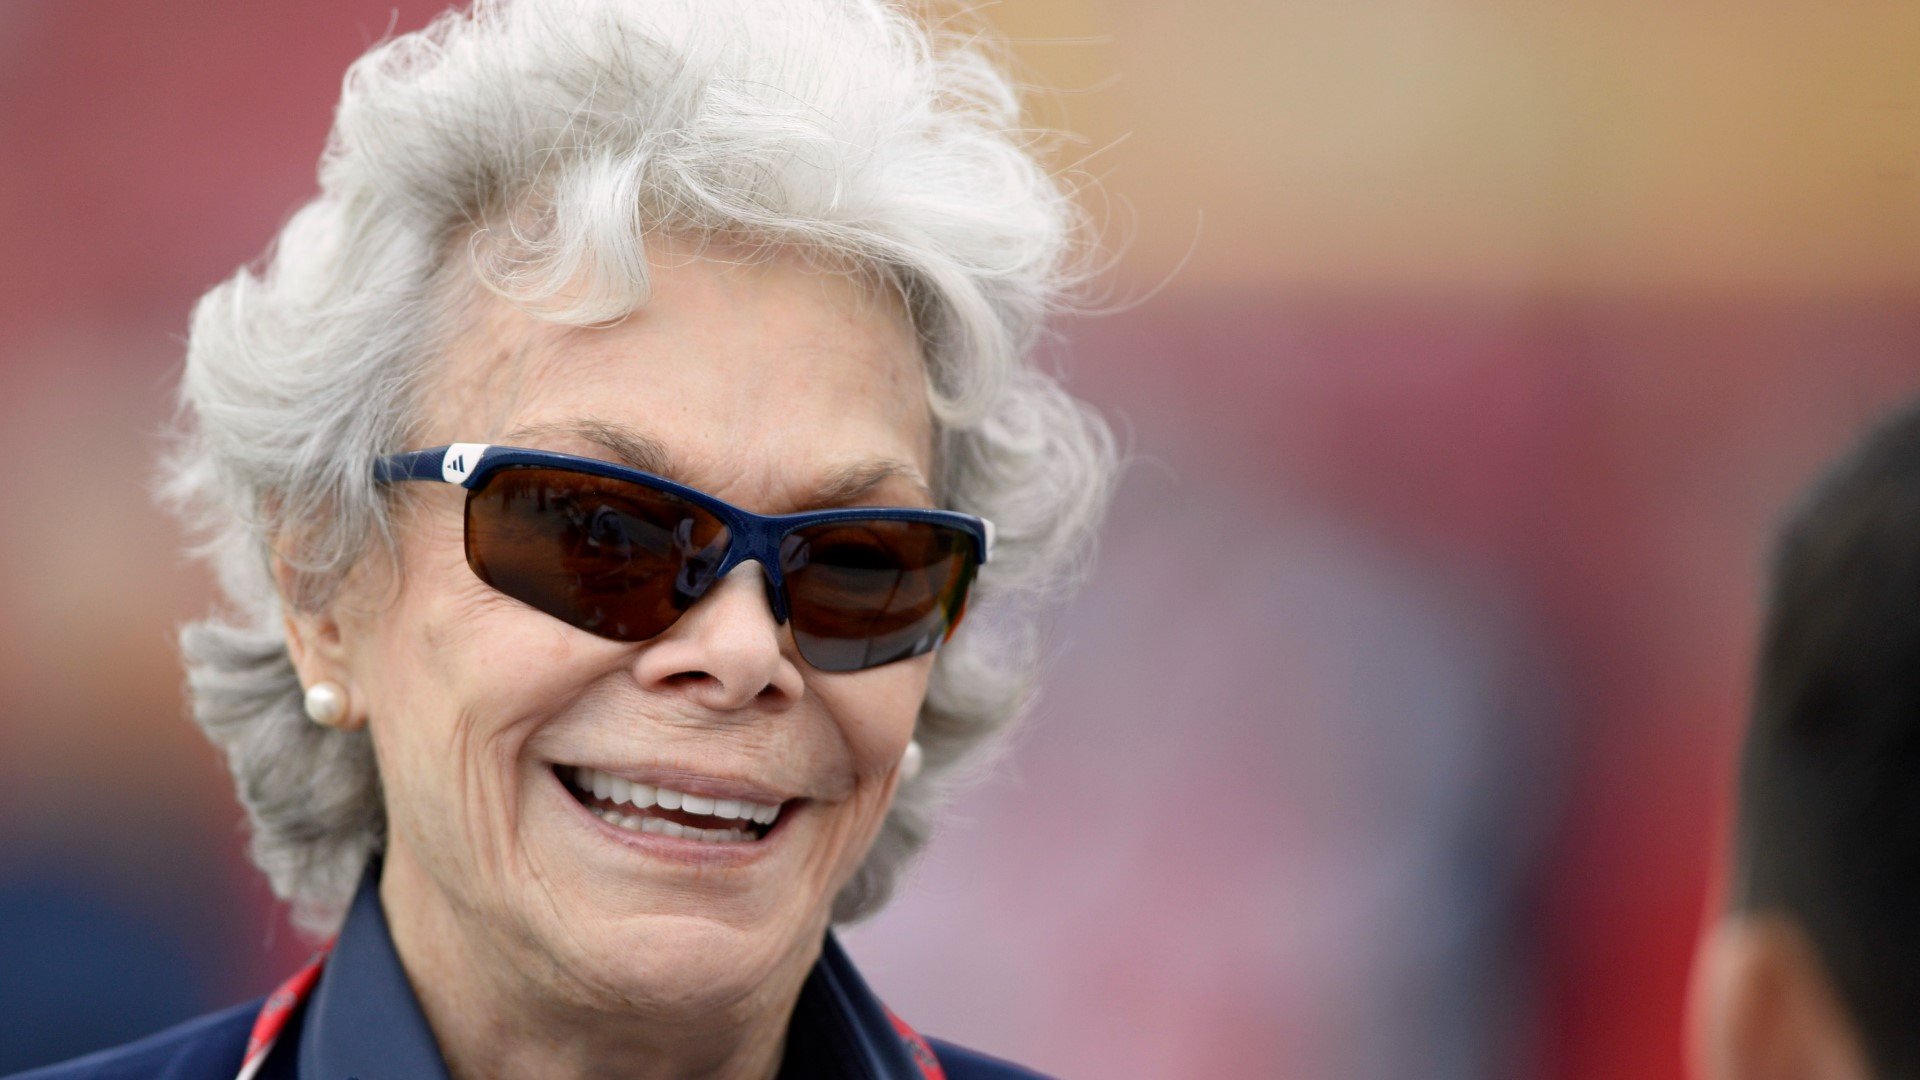 According to court documents, Cary McNair is trying to take over Texans owner Janice McNair's estate, claiming that she's incapacitated.